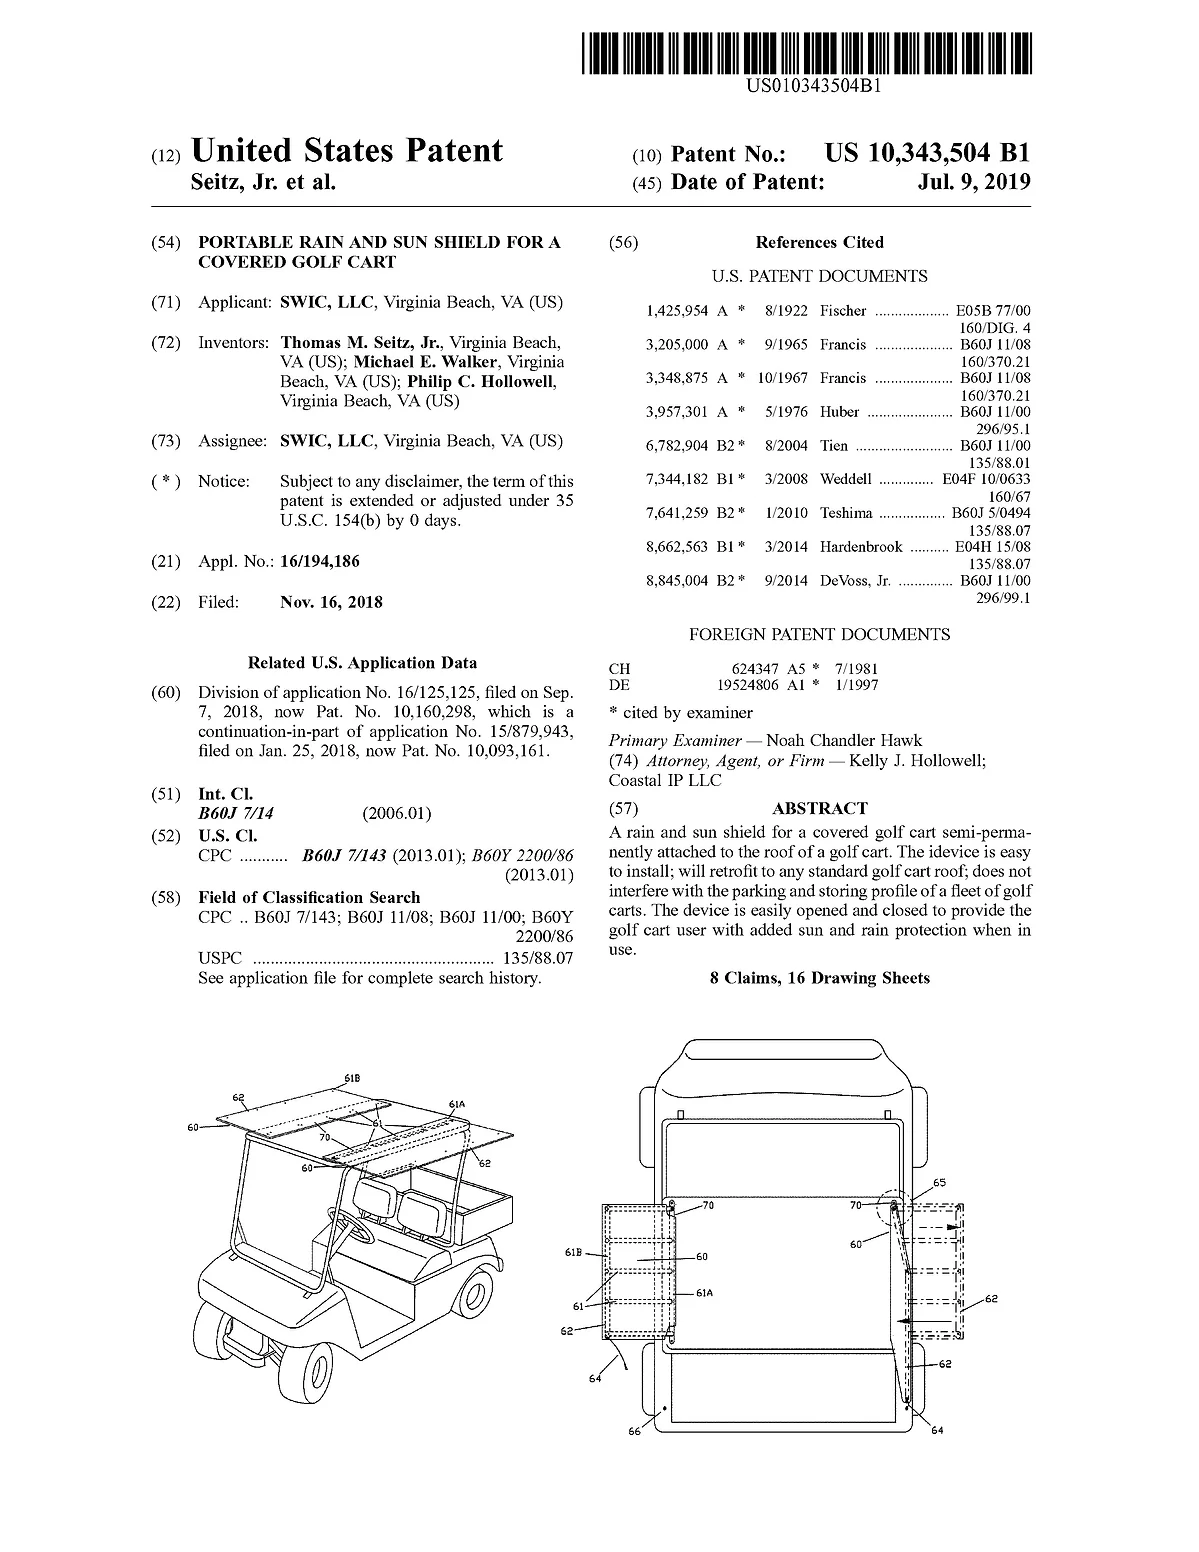 Mechanical Systems Patents